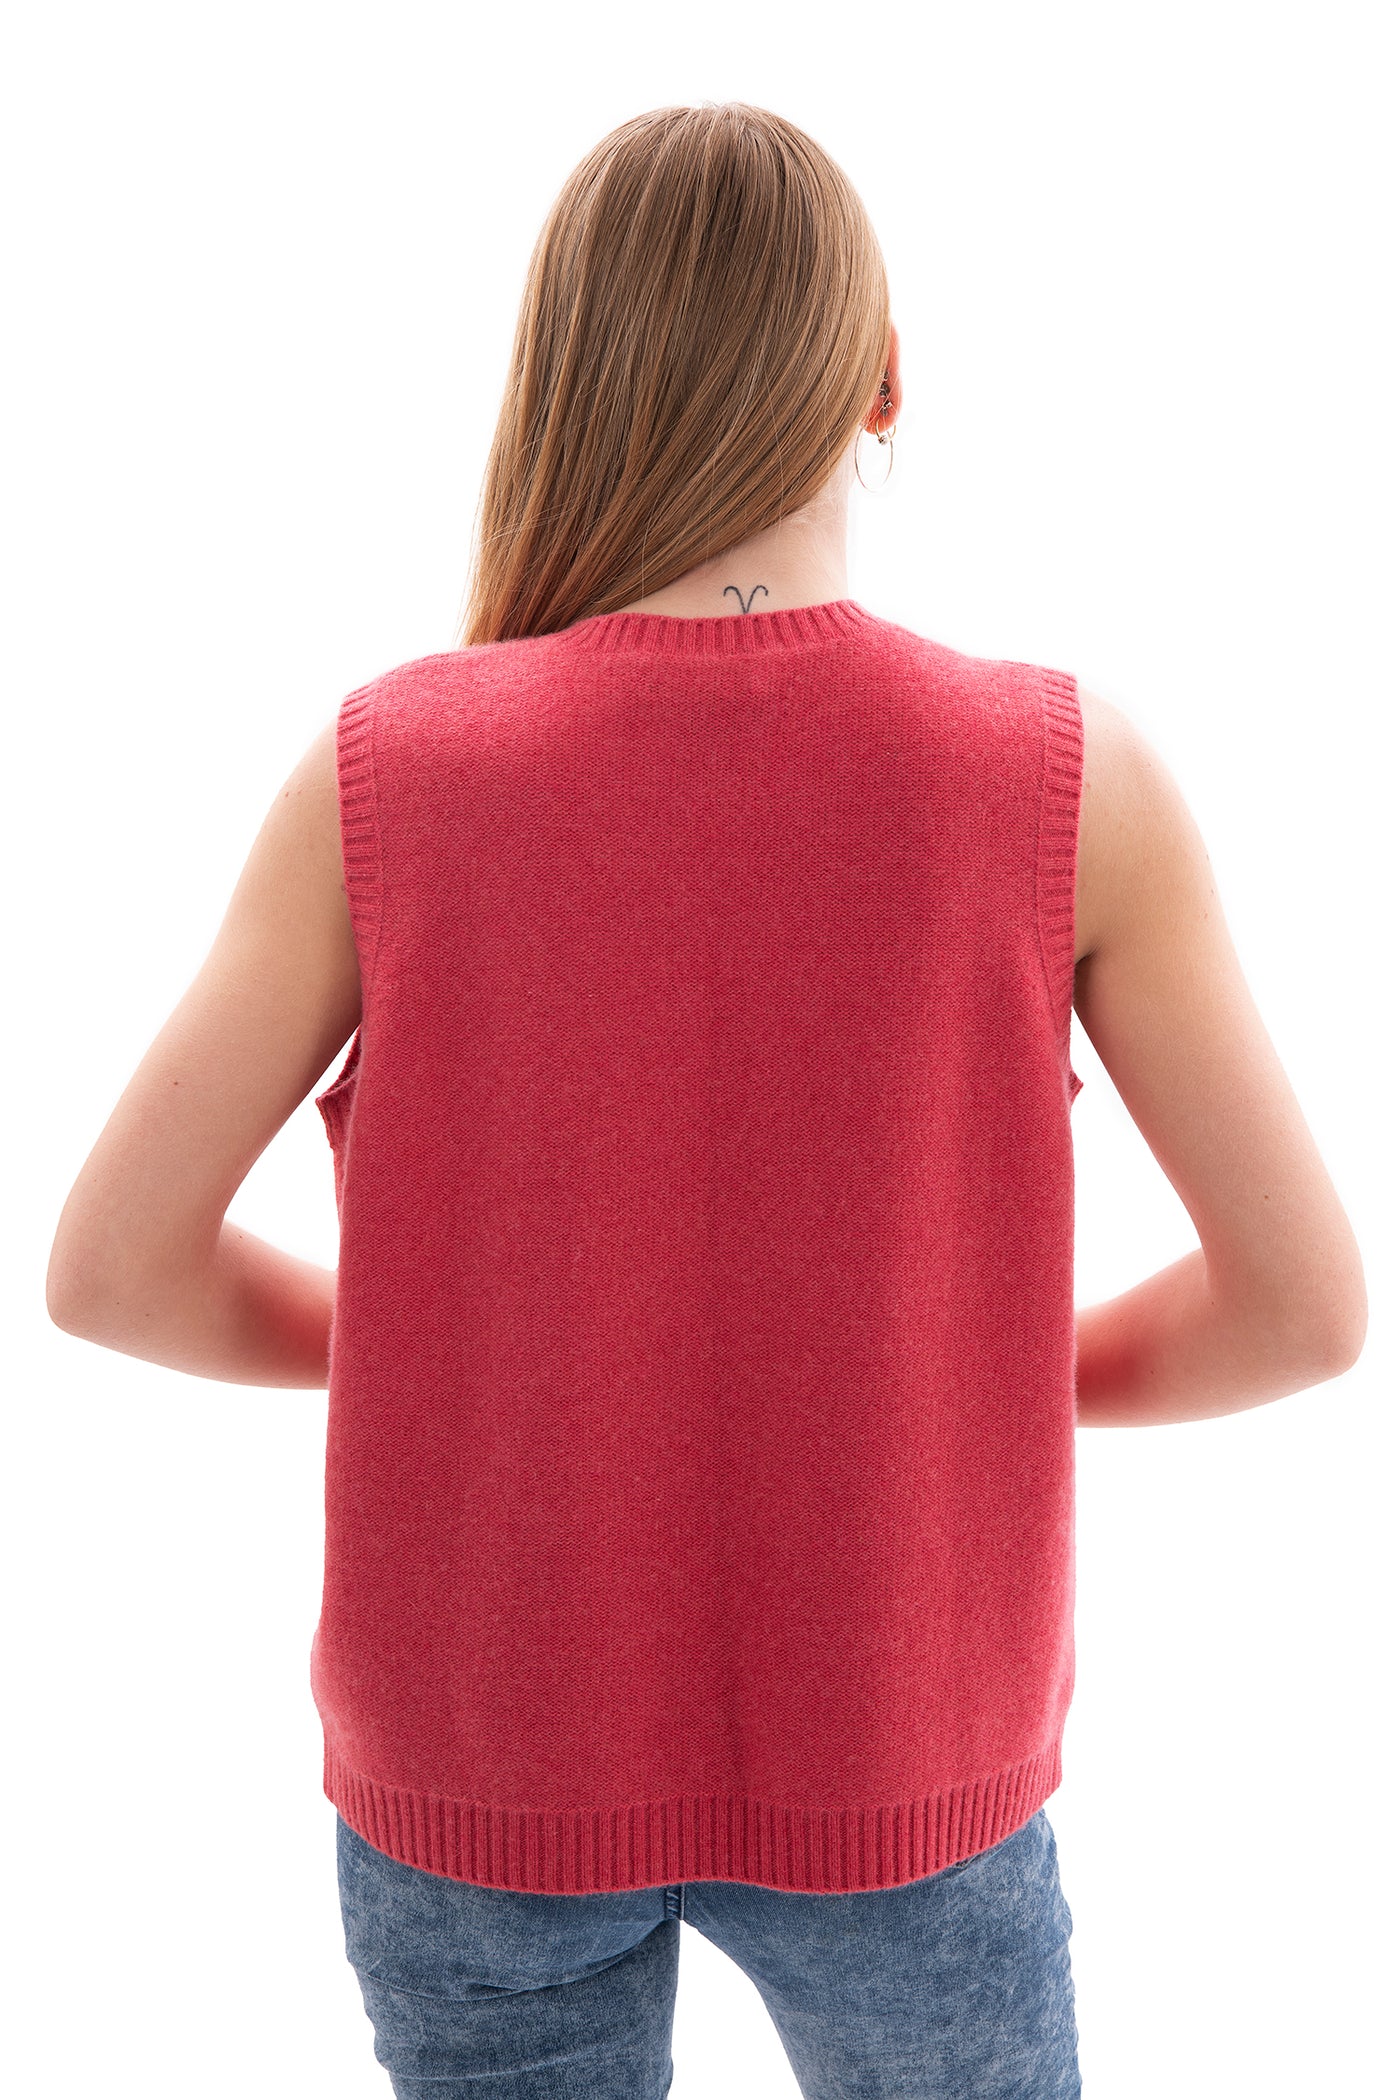 Lands'end Cashmere Sleeveless knitted top